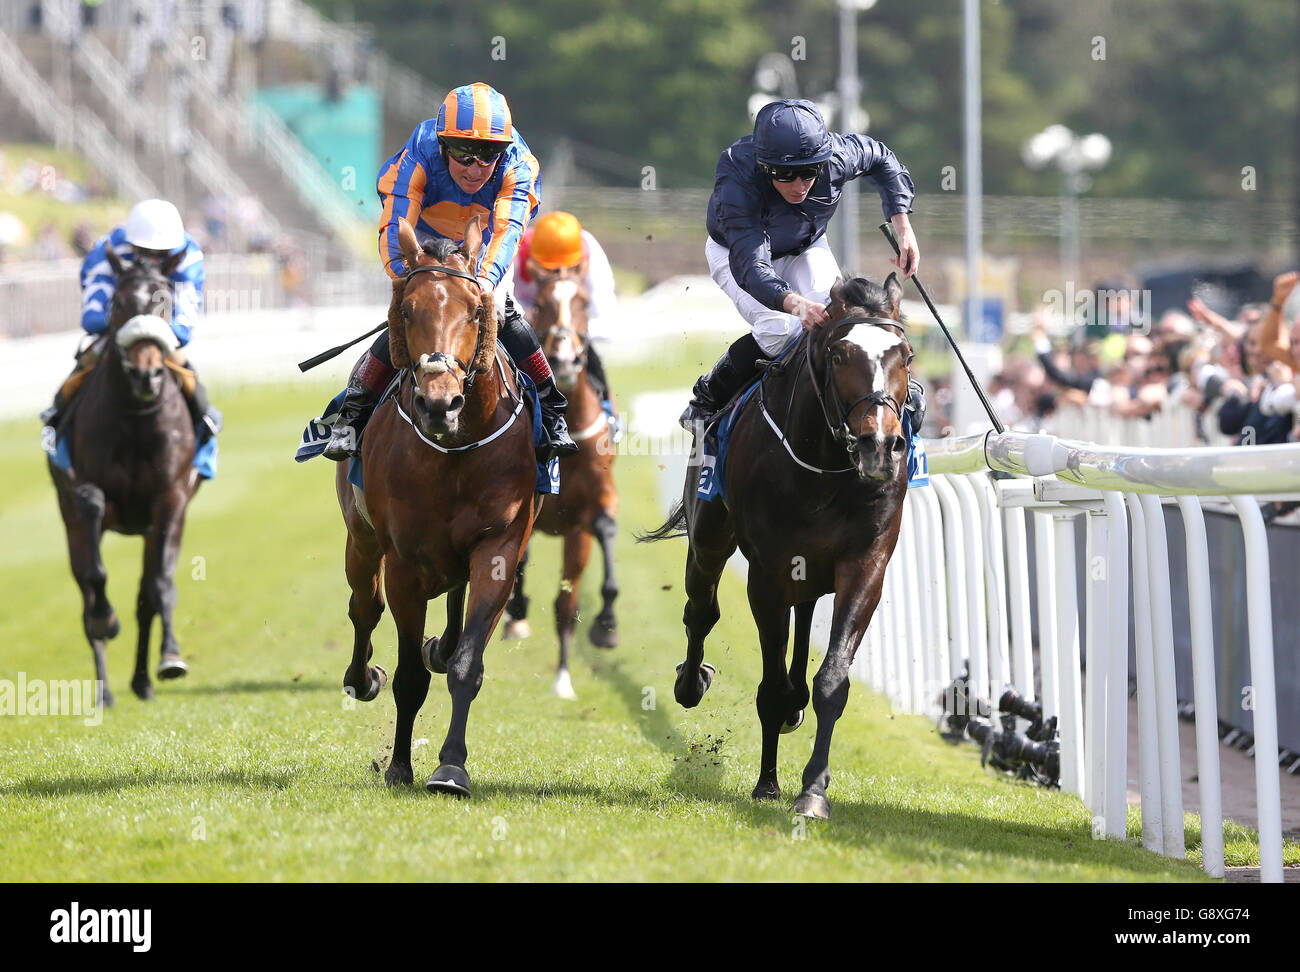 US Army Ranger (right) ridden by Ryan Moore wins The MBNA Chester Vase from Port Douglas (left), during Boodles Ladies Day of the Boodles May Festival at Chester Racecourse. Stock Photo